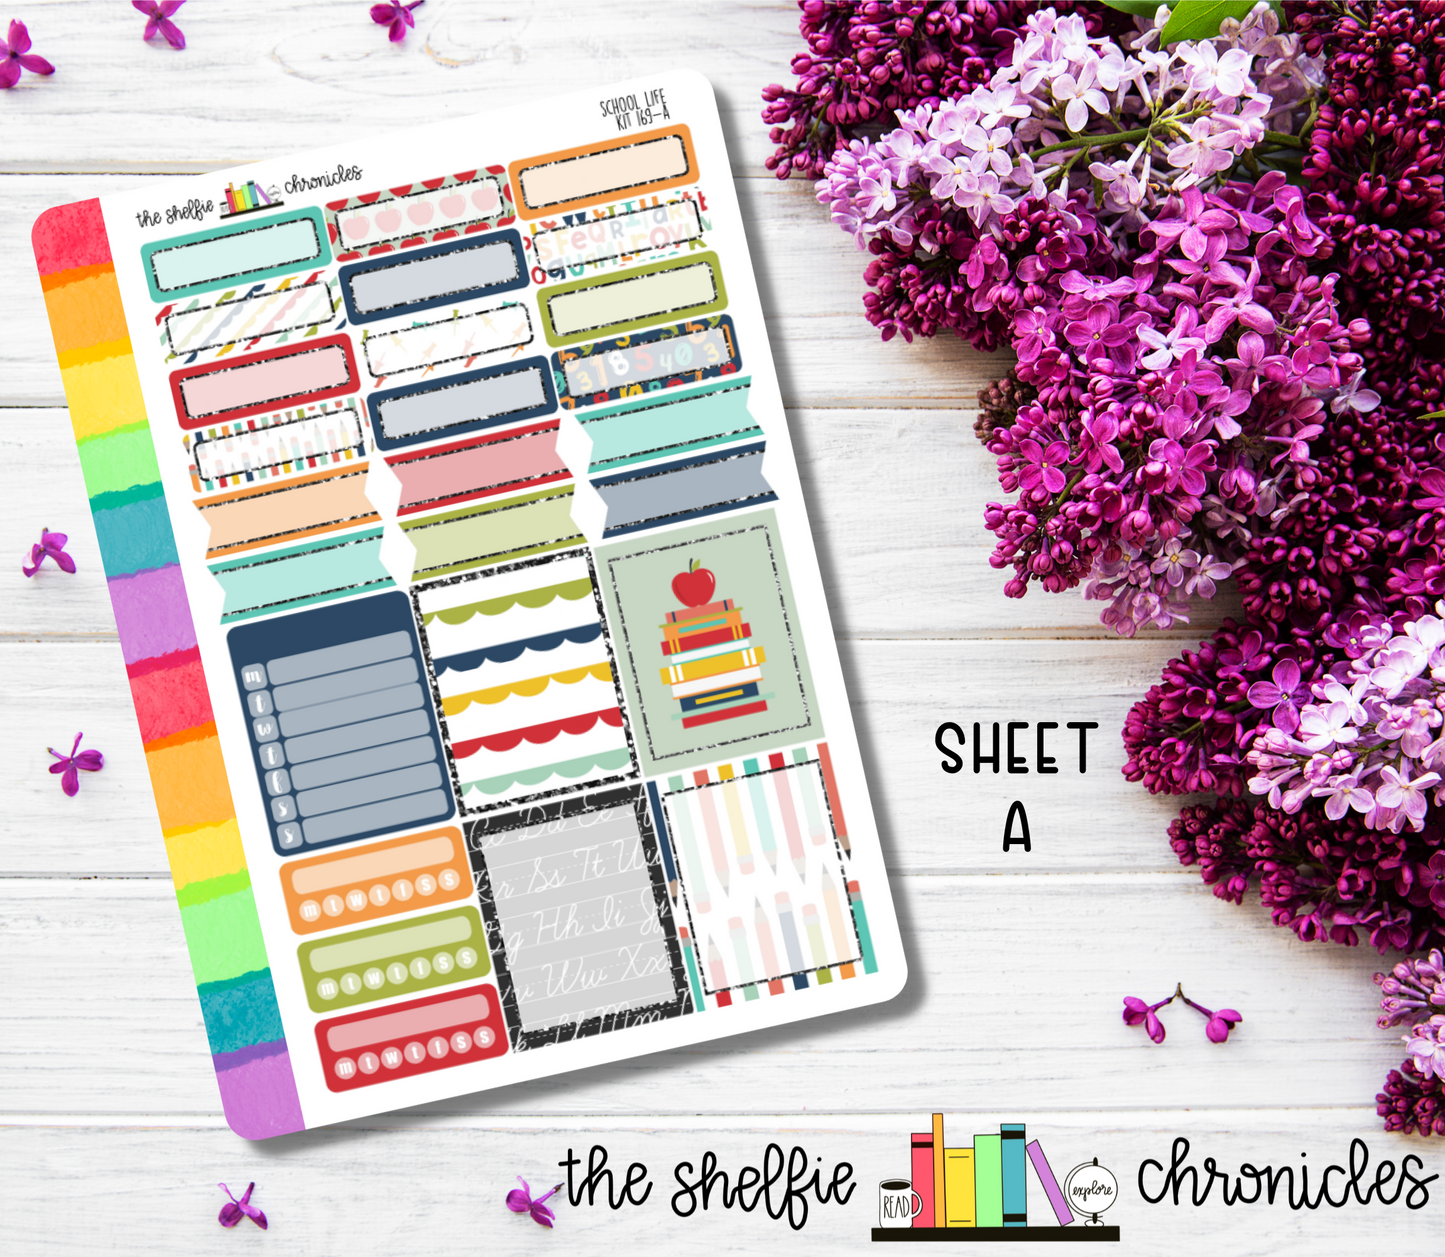 Kit 169 - School Life Weekly Kit - Die Cut Stickers - Repositionable Paper - Made To Fit 7x9 Planners